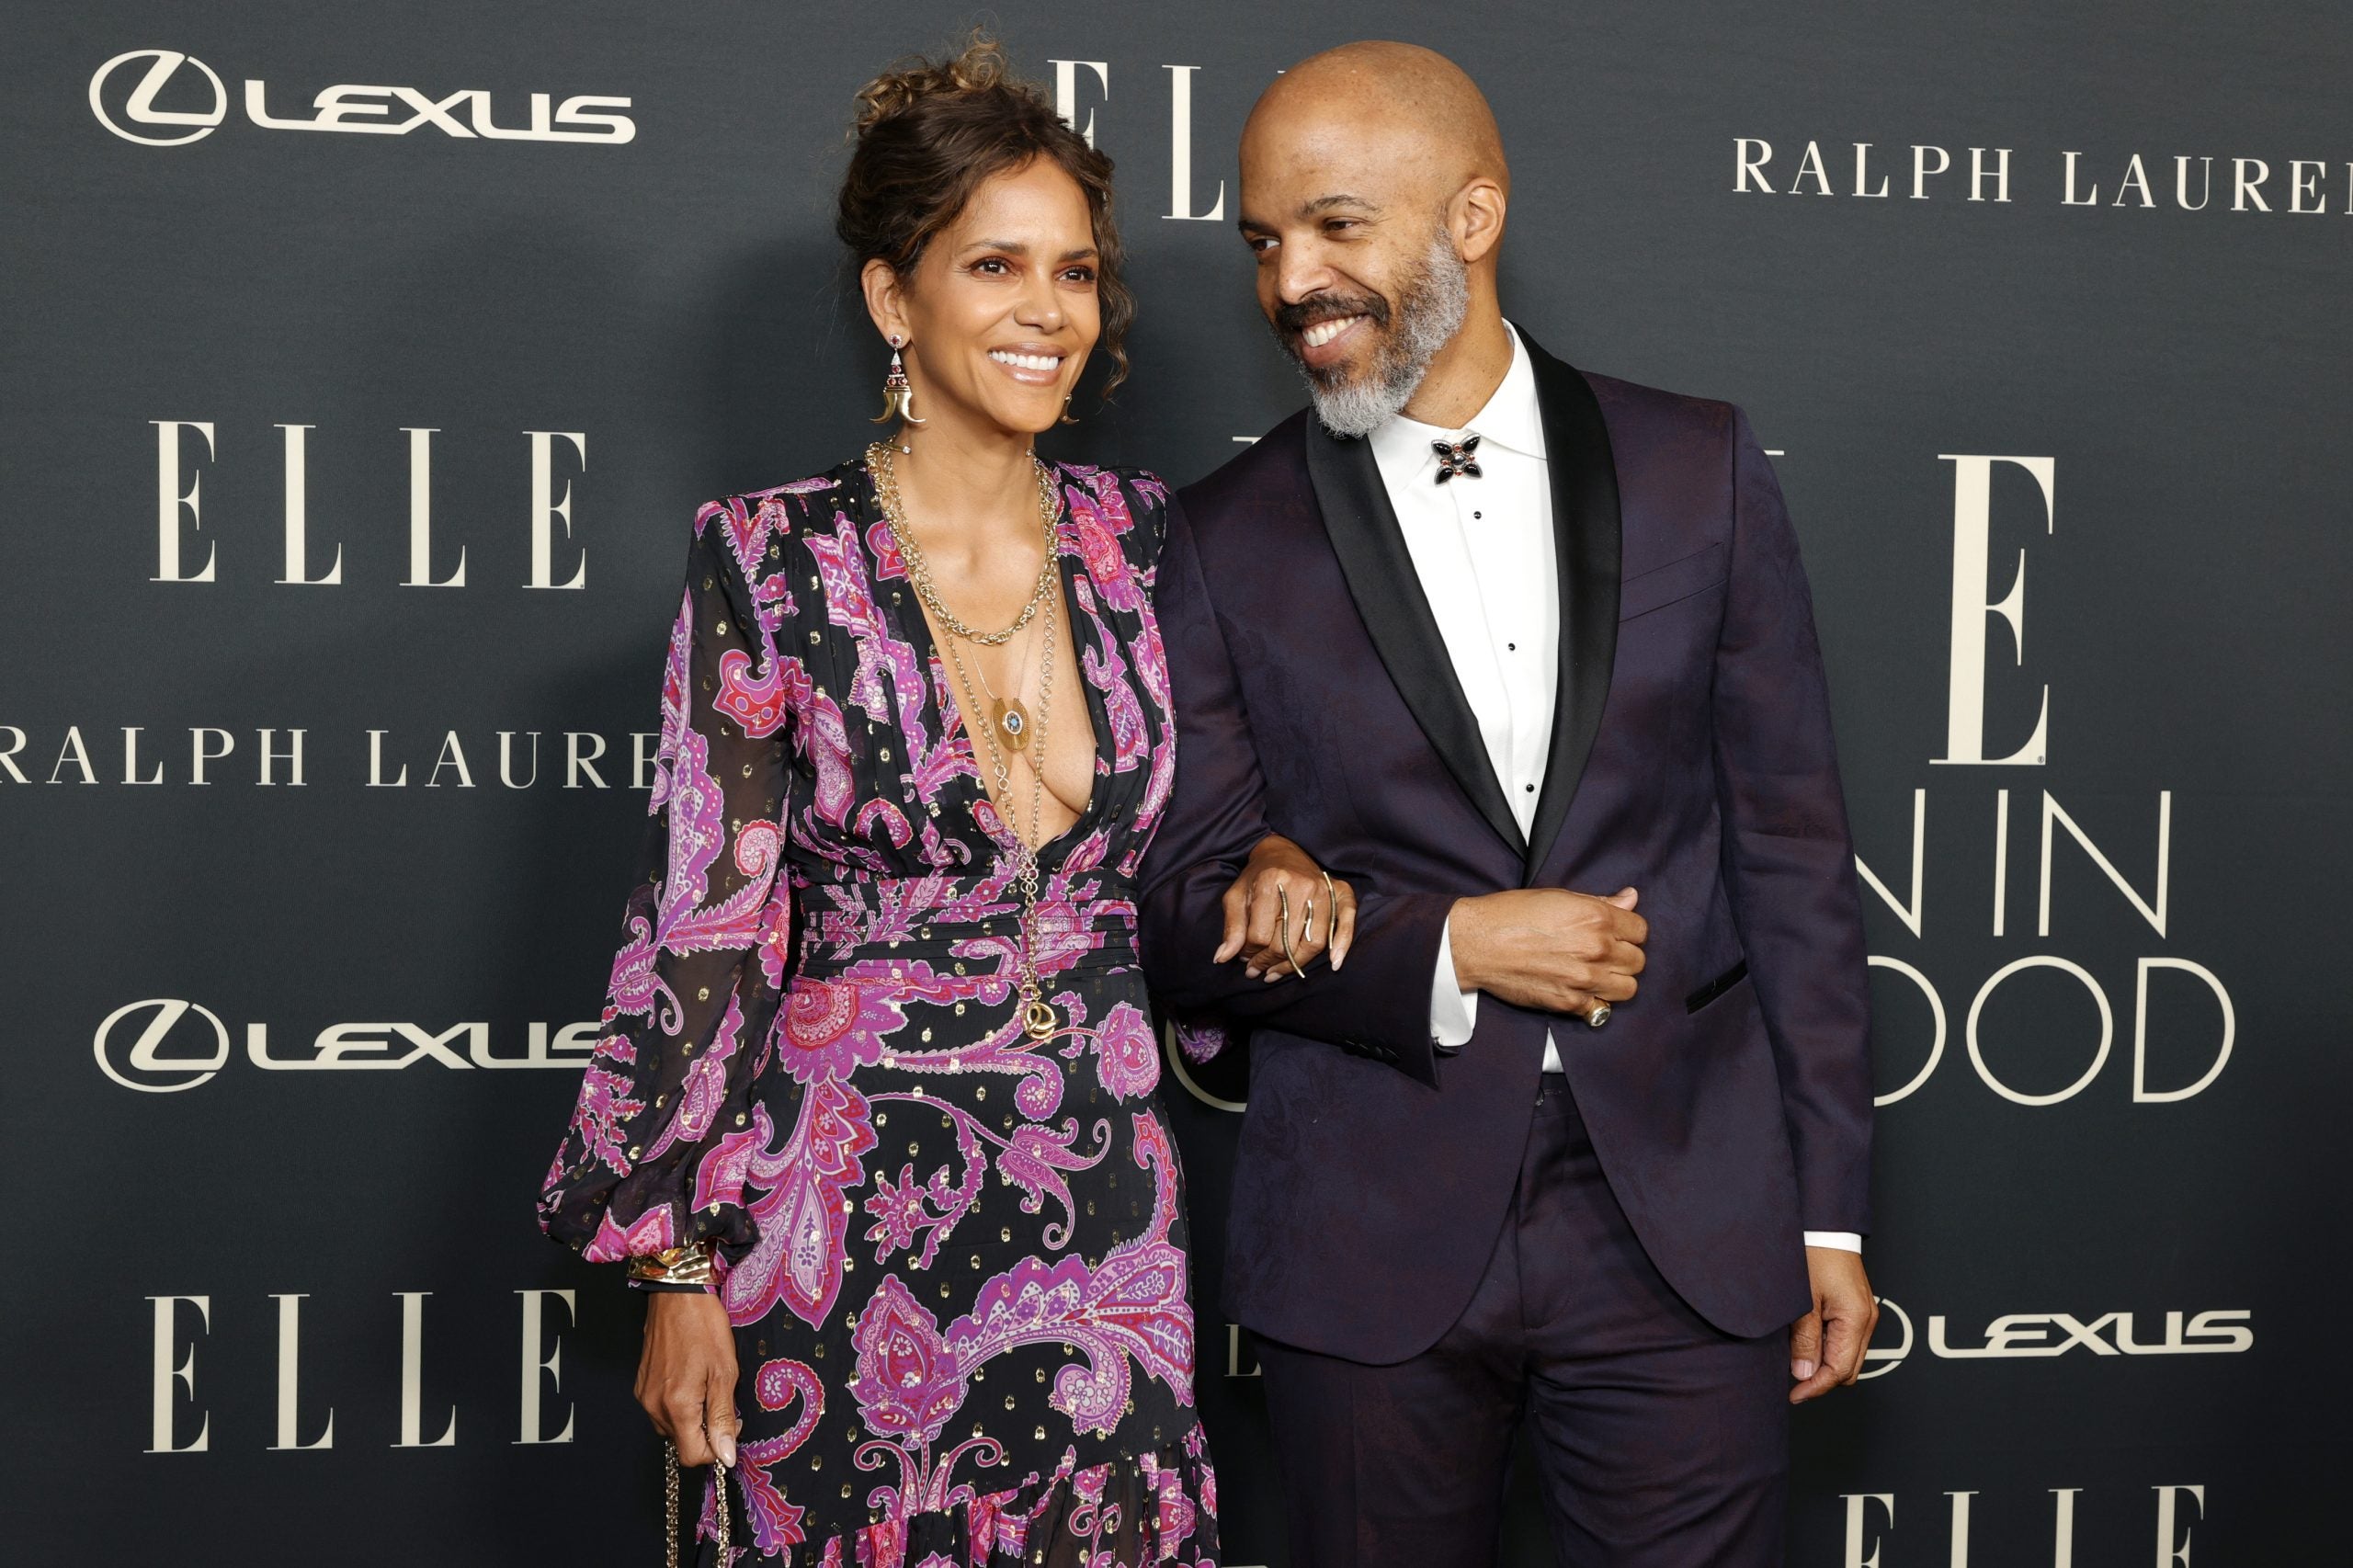 Halle Berry On Falling In Love With Van Hunt: 'The Right One Finally Showed Up'